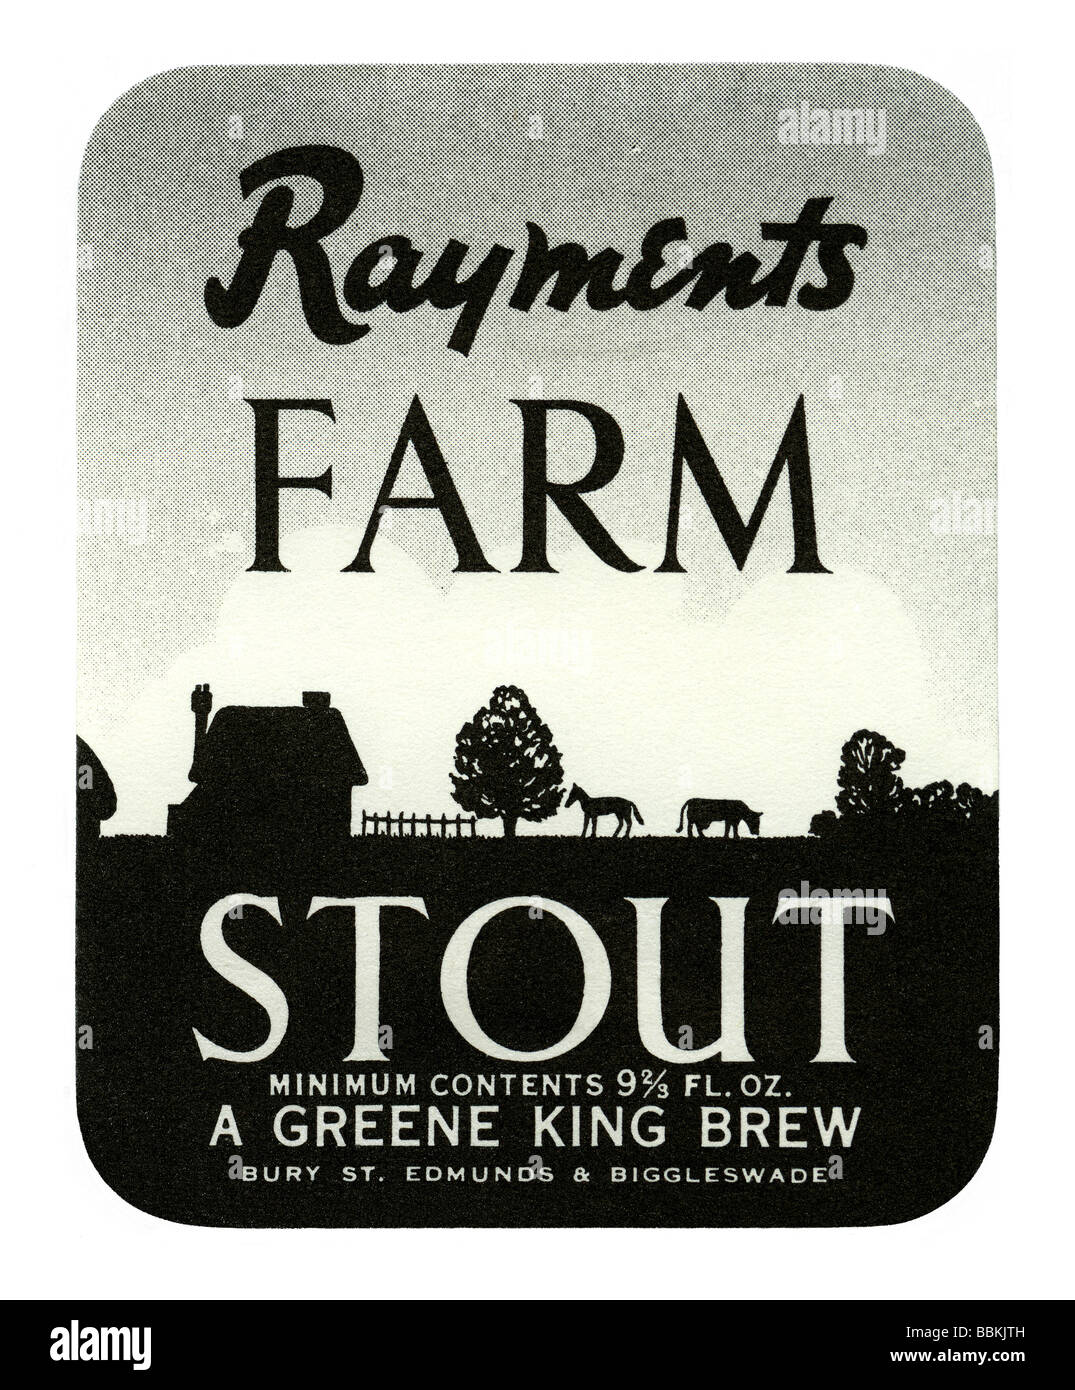 Old British beer label for Rayment's Farm Stout, Furneux Pelham, Hertfordshire, England Stock Photo